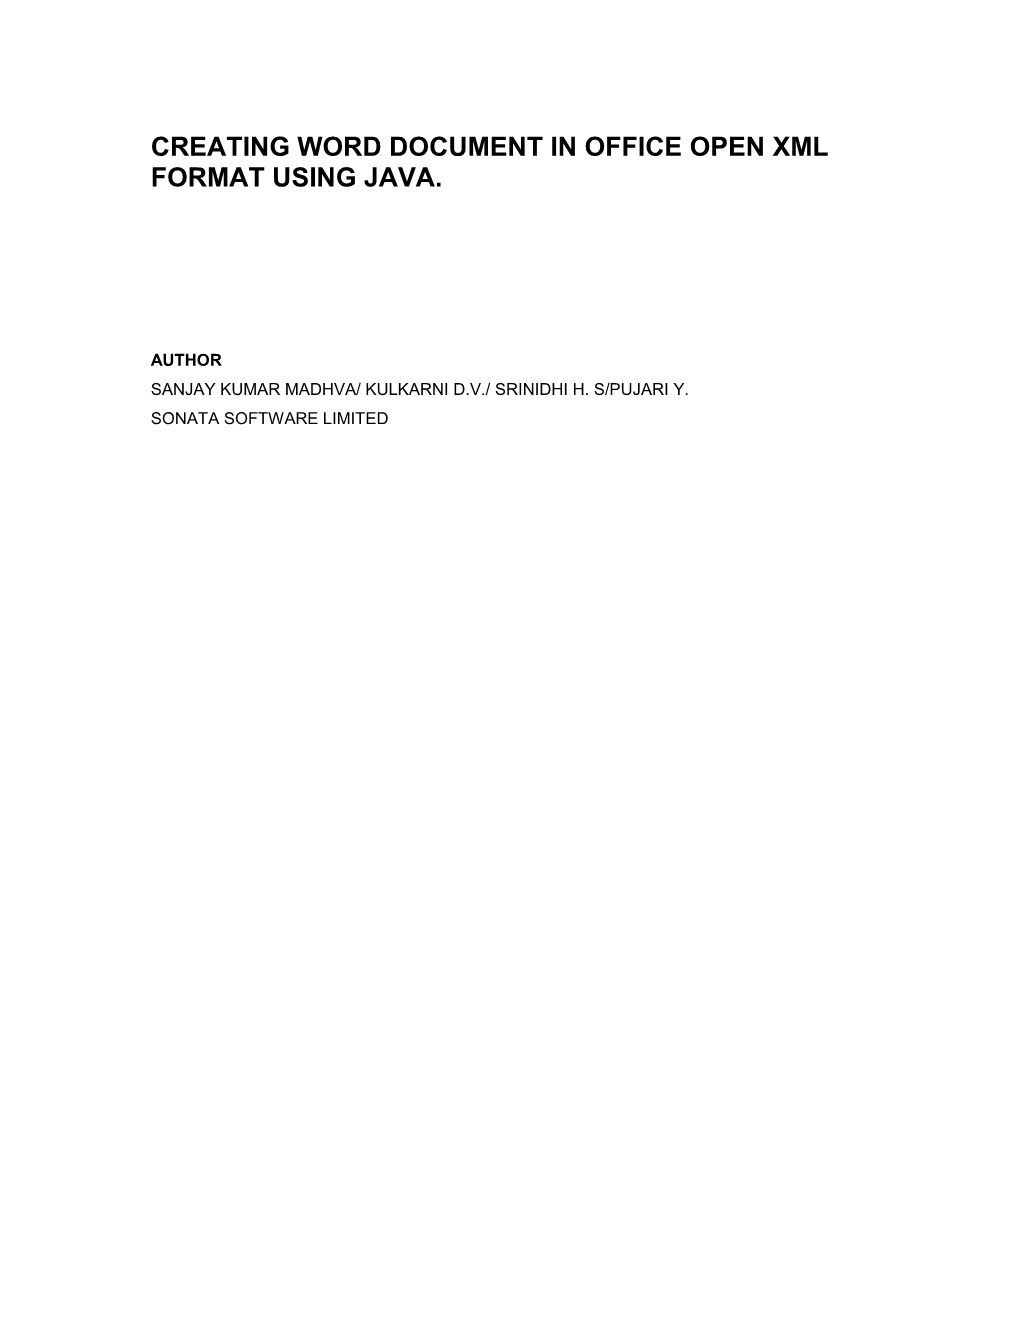 Creating Word Document in Office Open Xml Format Using Java